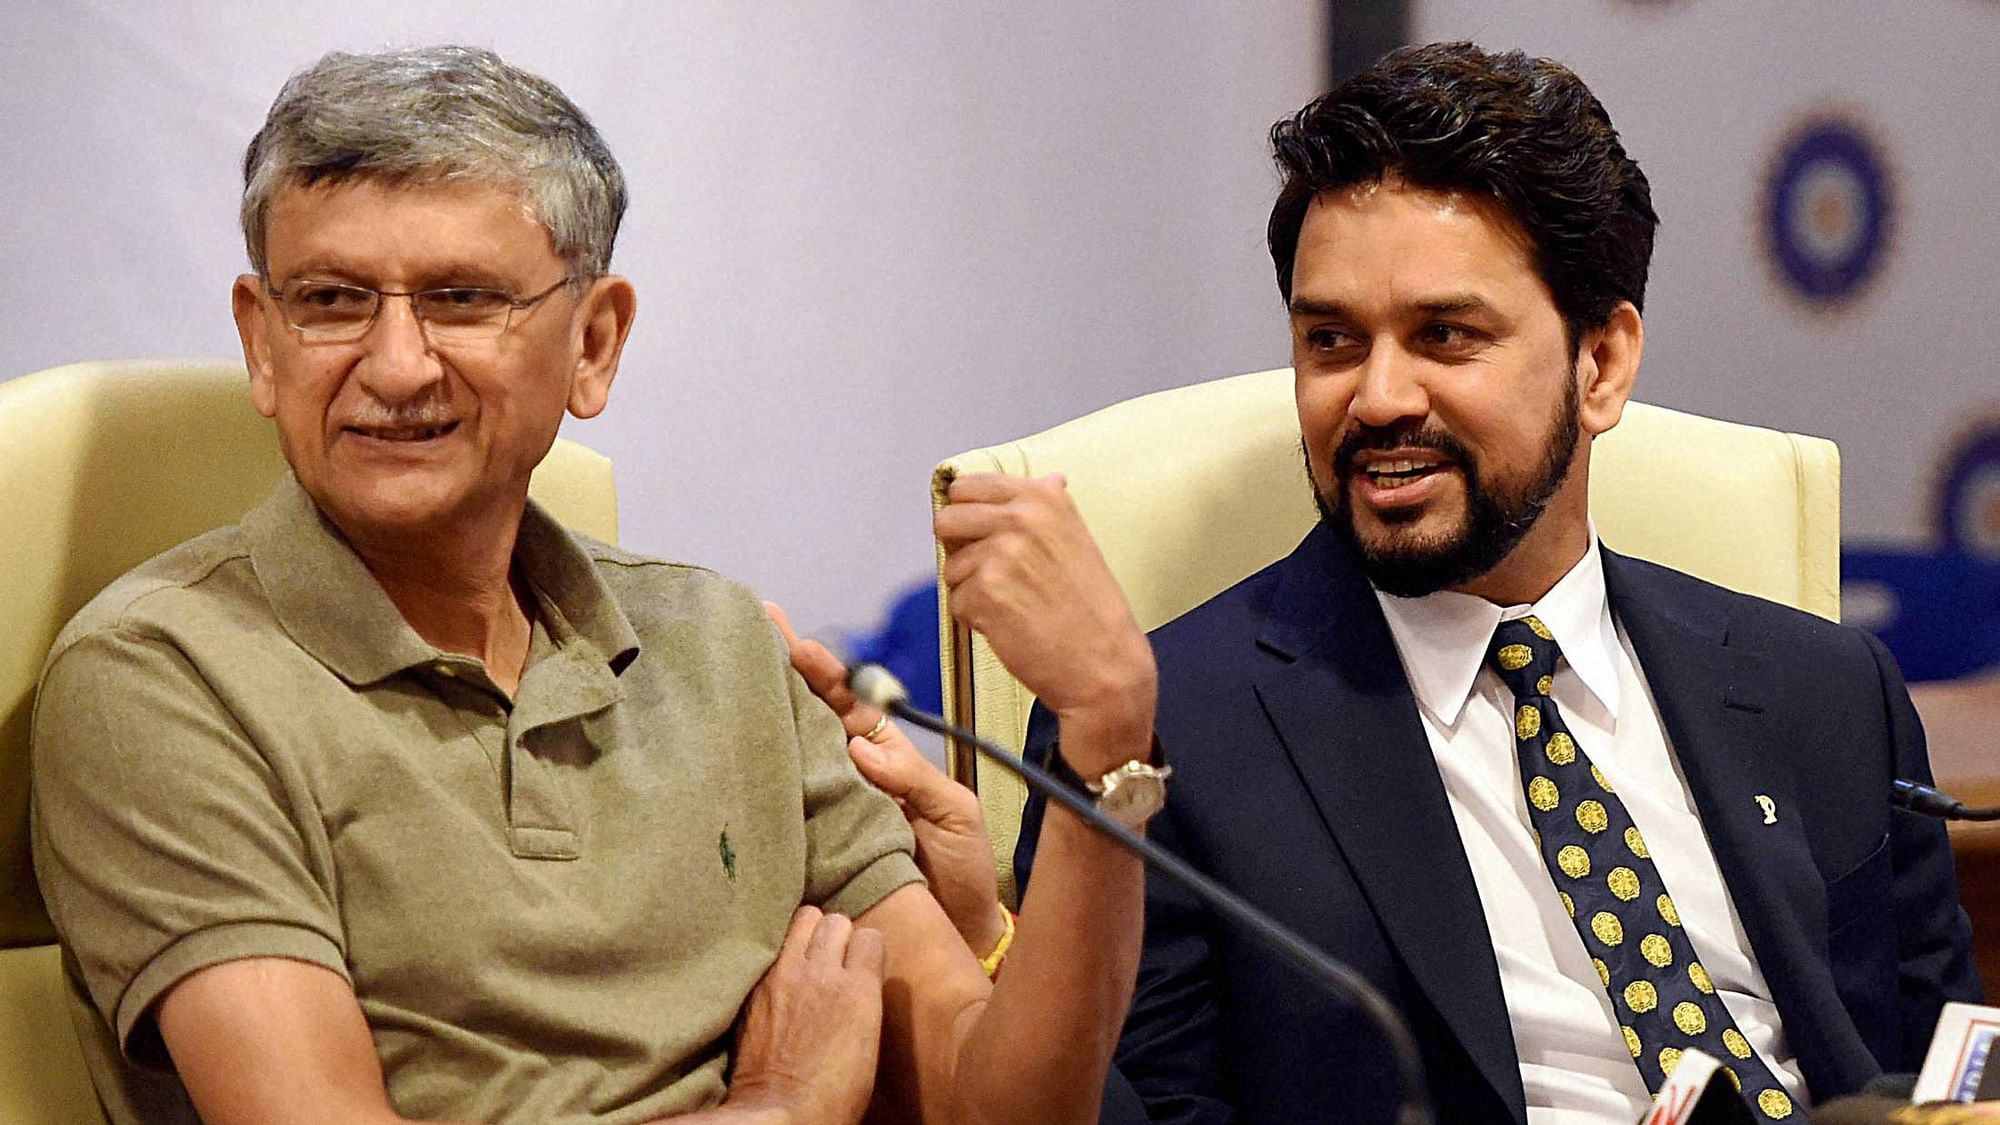 BCCI president Anurag Thakur along with BCCI secretary Ajay Shirke during a press conference. (Photo: PTI)